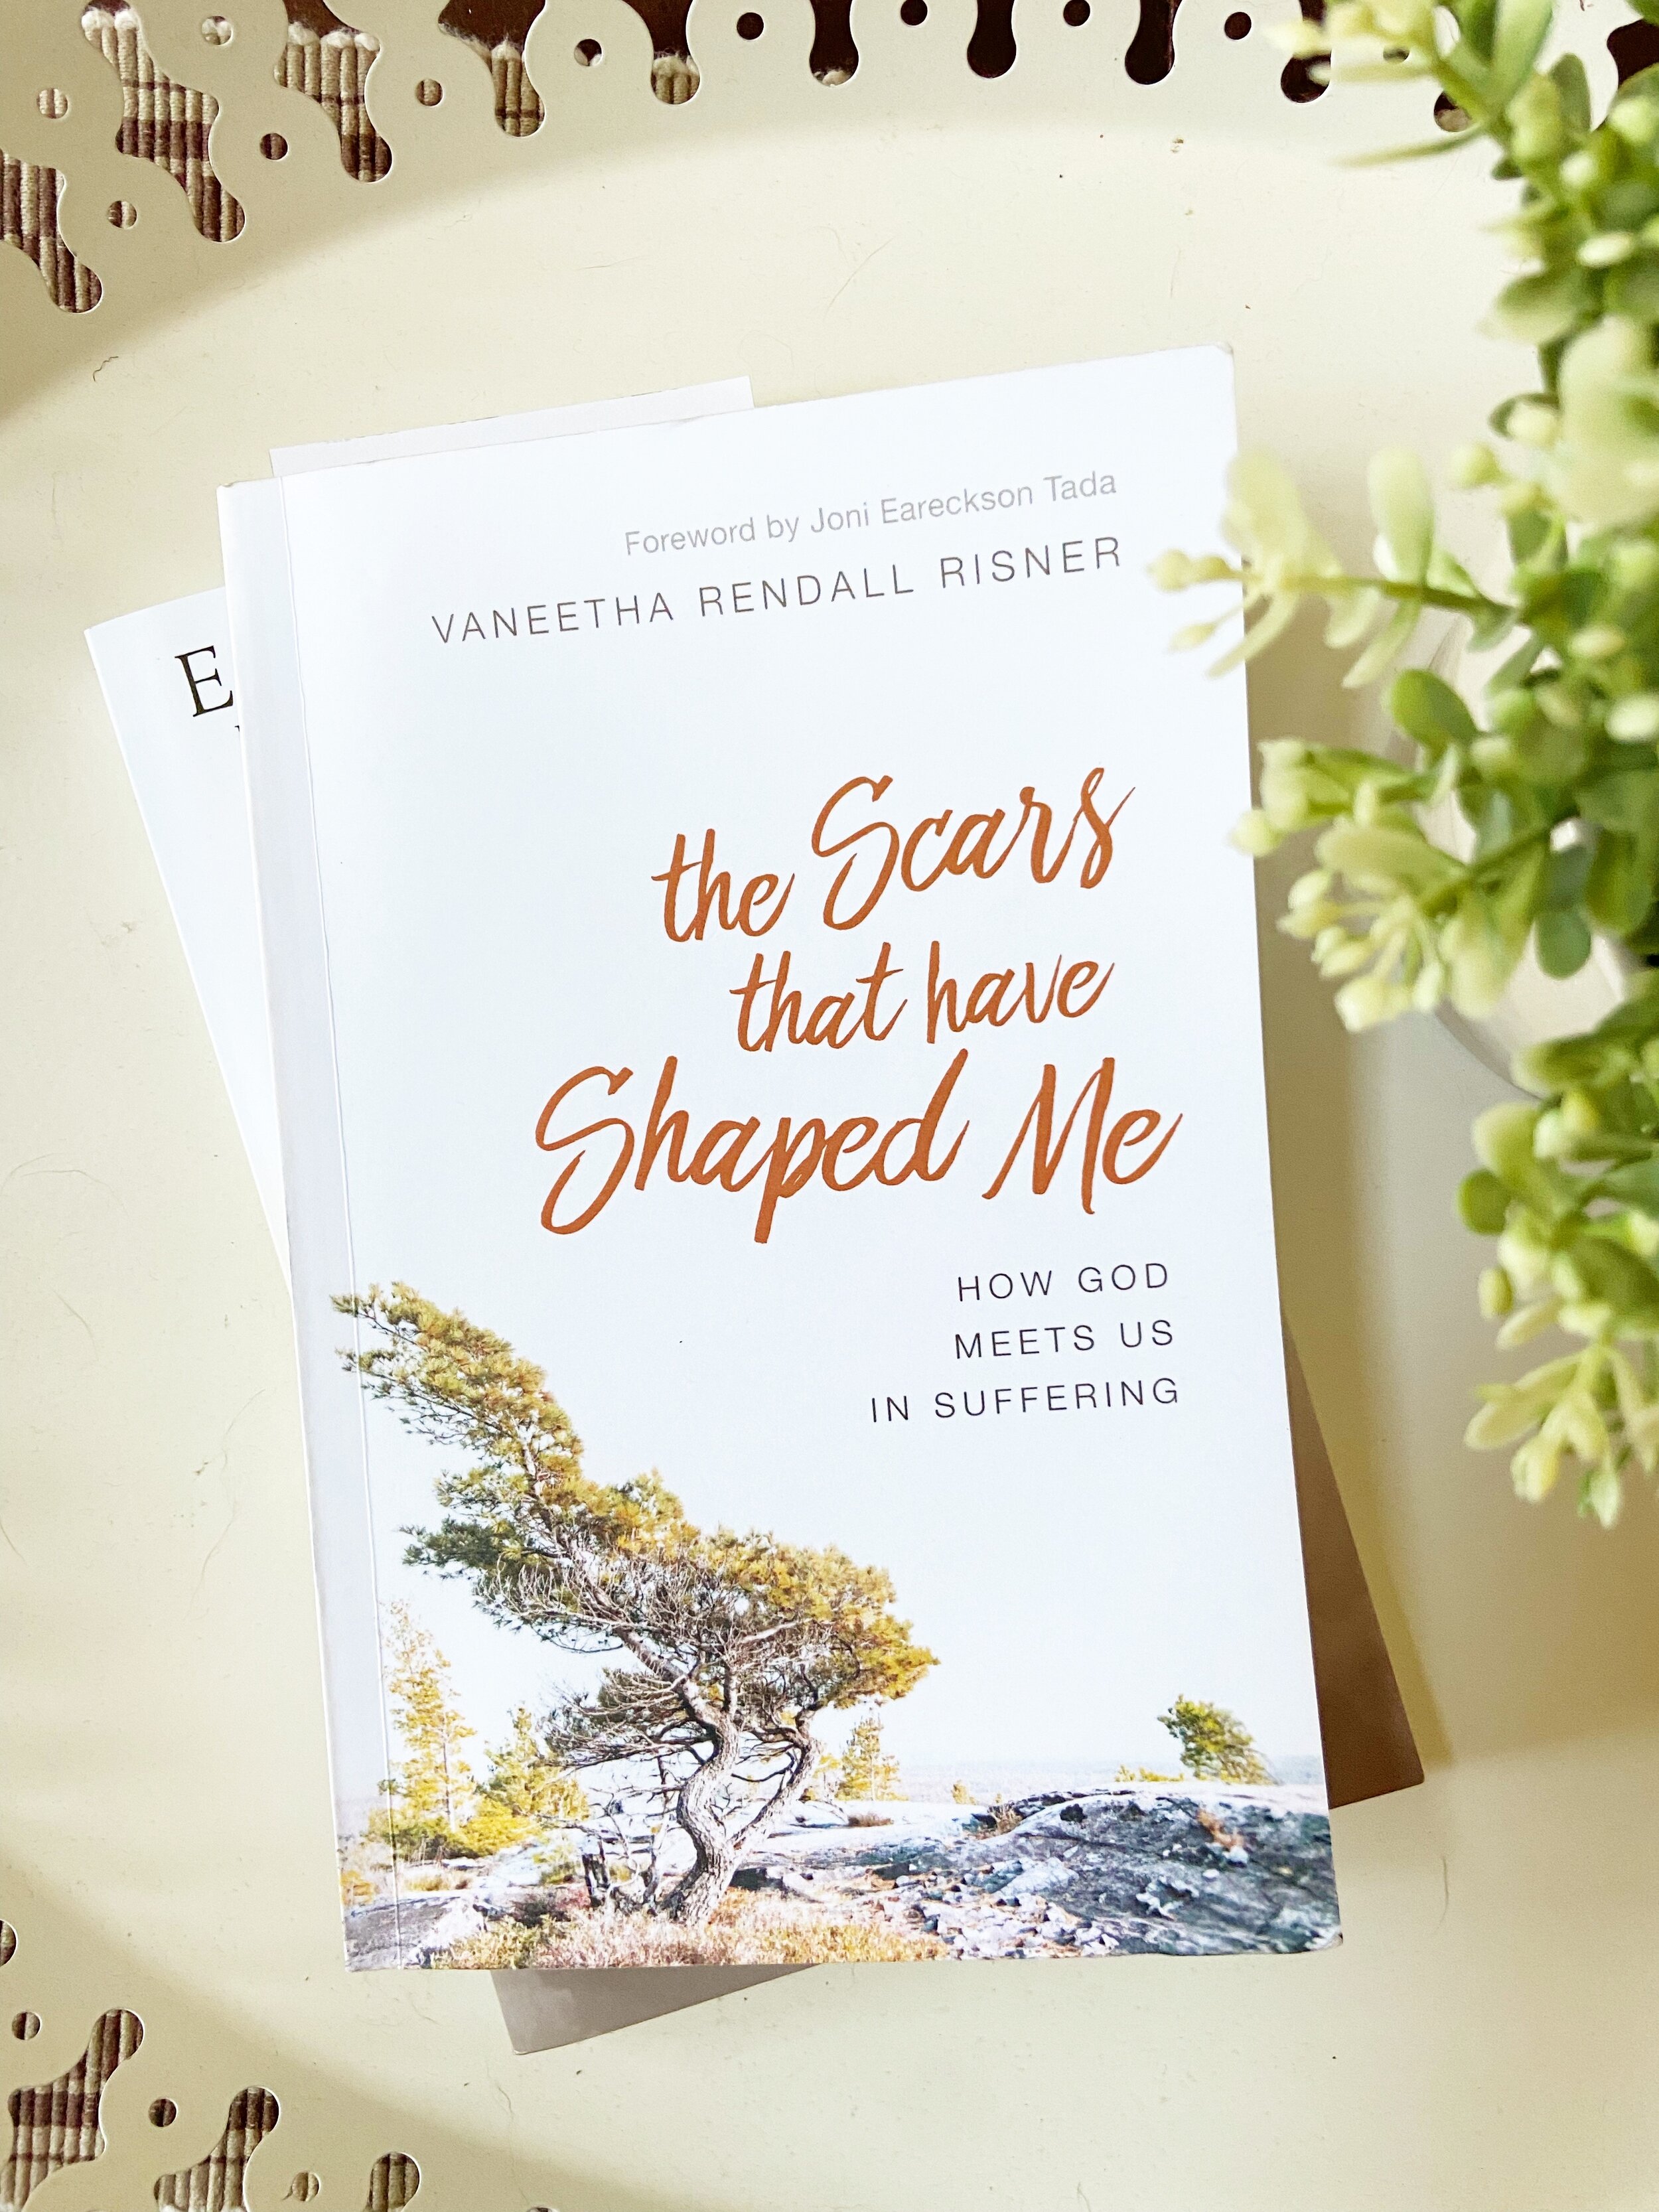 Book Review: The Scars that have Shaped Me